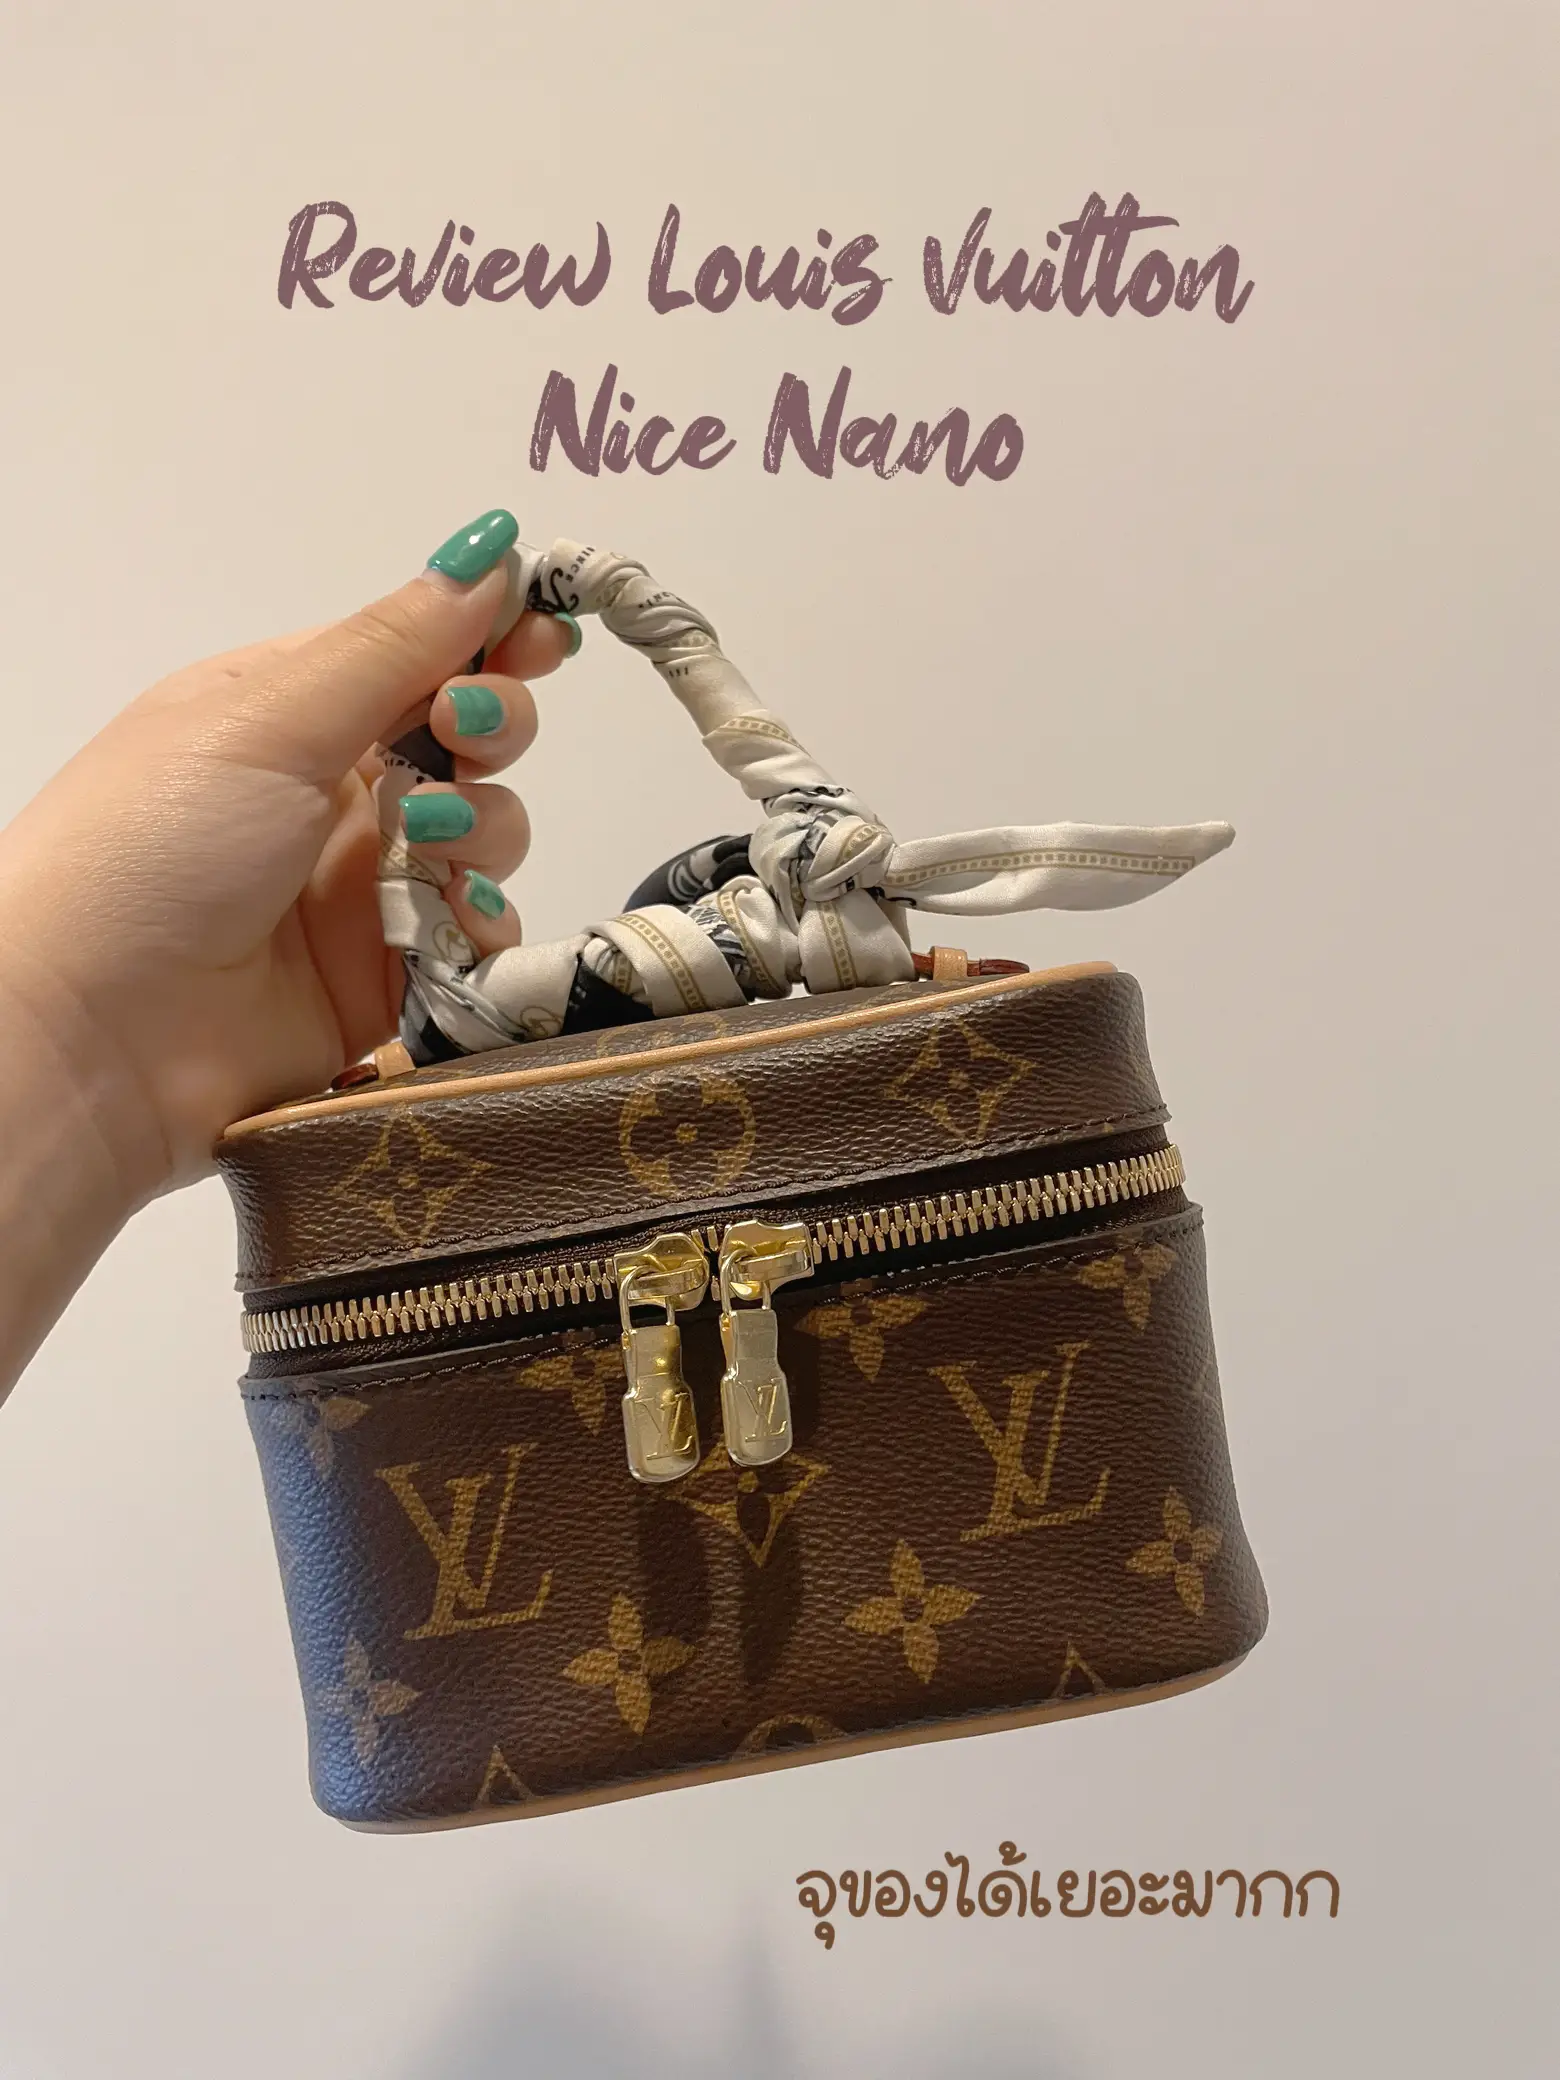 Louis Vuitton Nice Nano Review/How to use it & what fits?? 